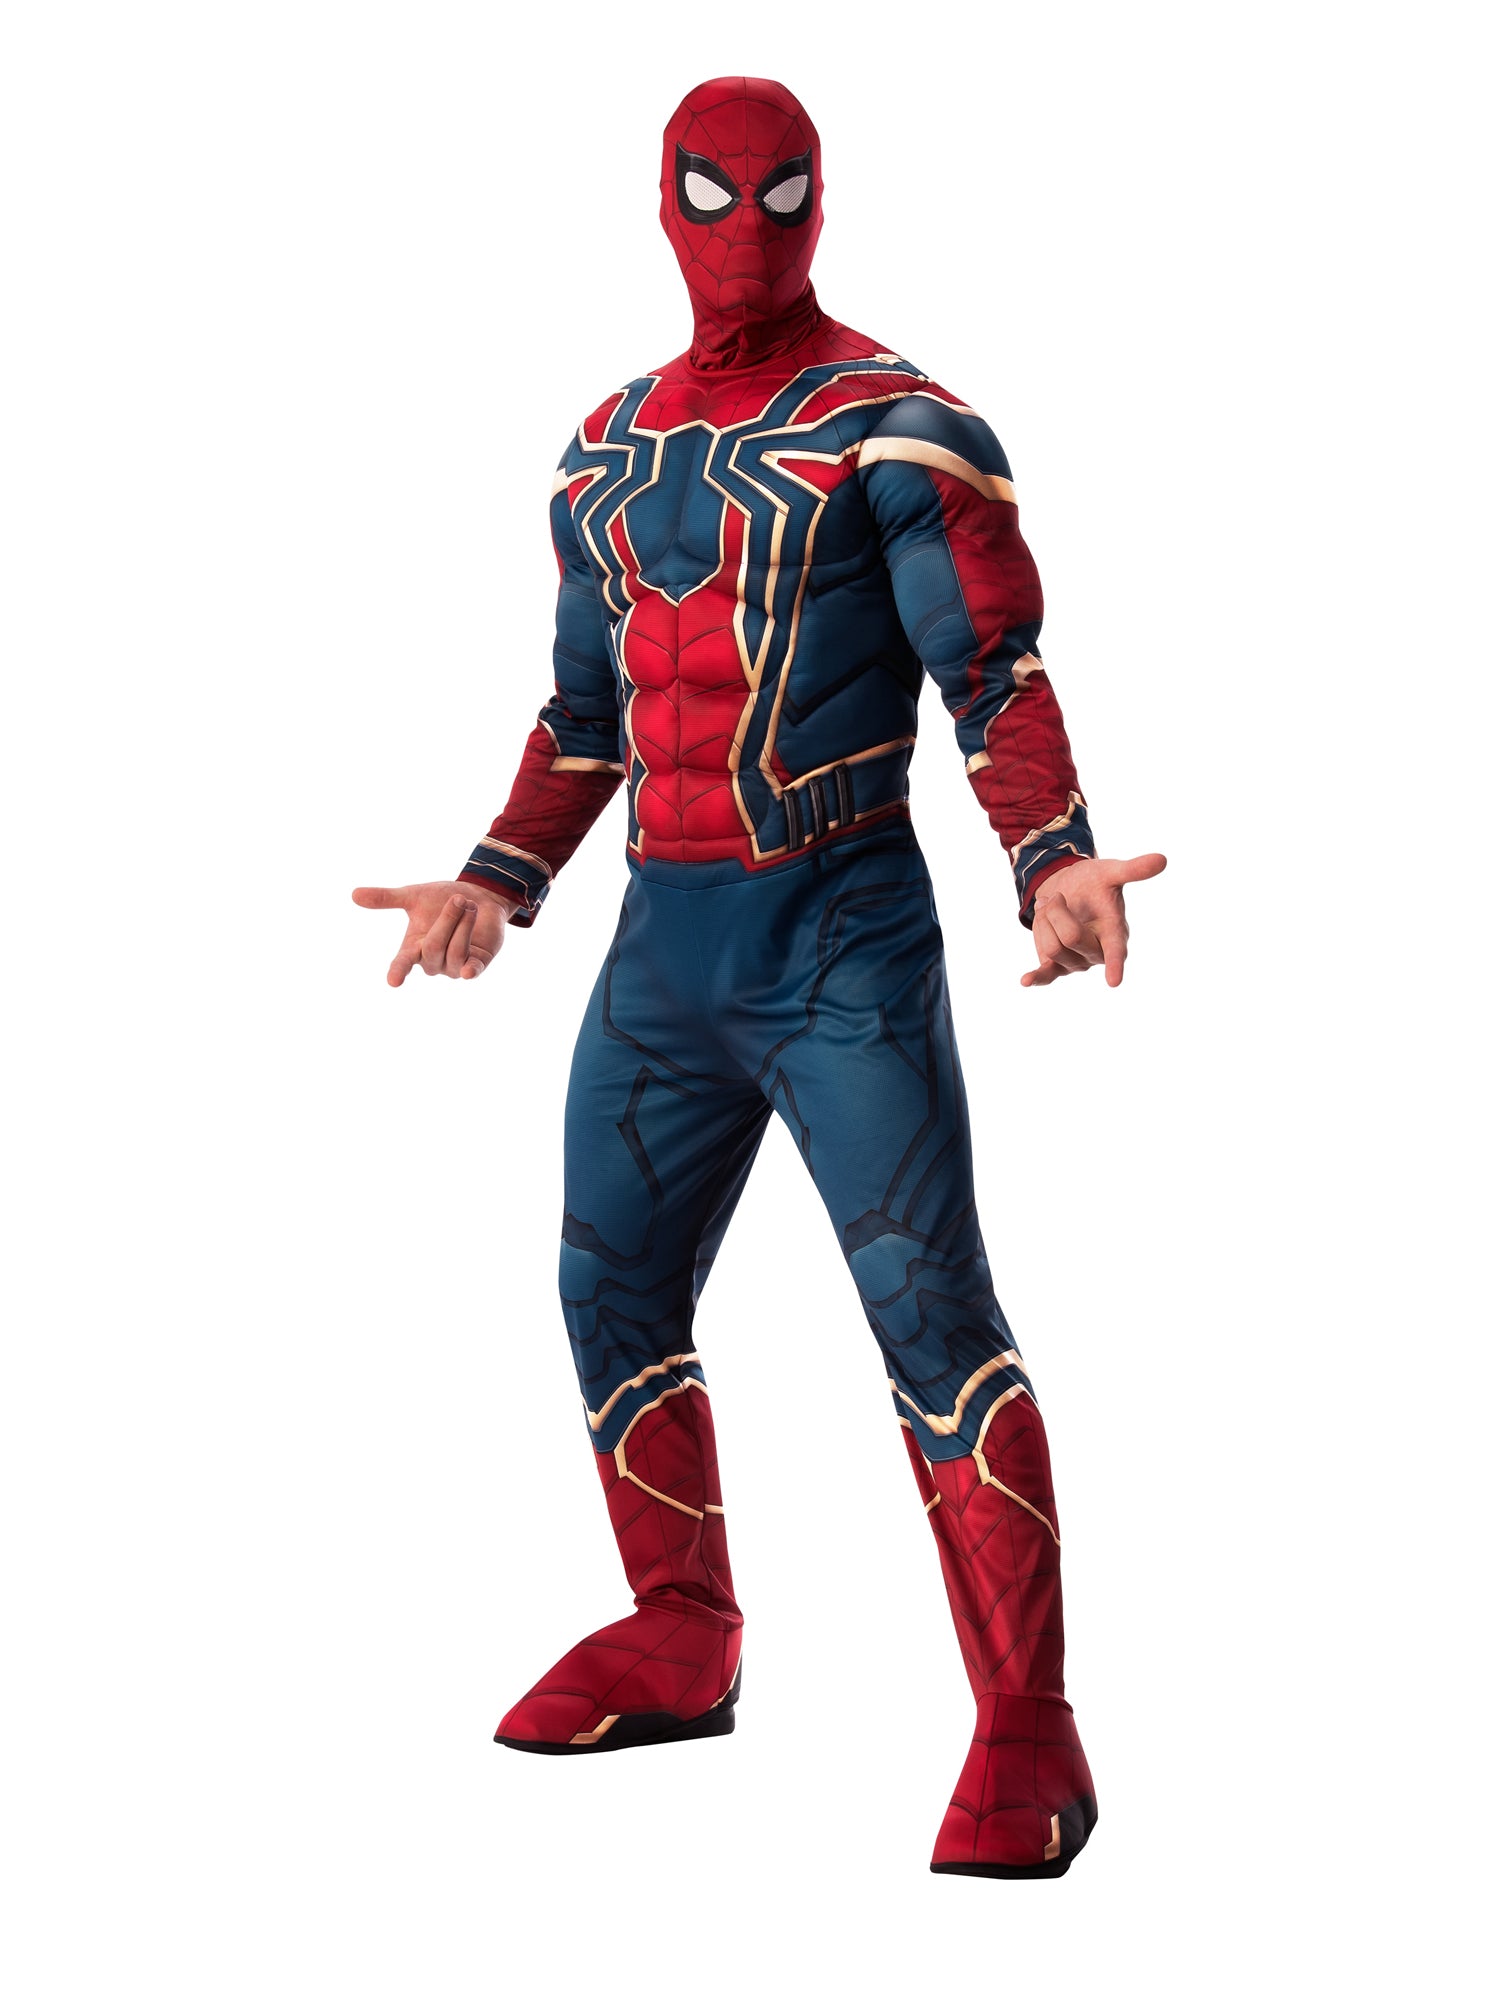 Iron Spider, Infinity War, Avengers, Infinity War, Multi, Marvel, Adult Costume, Extra Large, Front